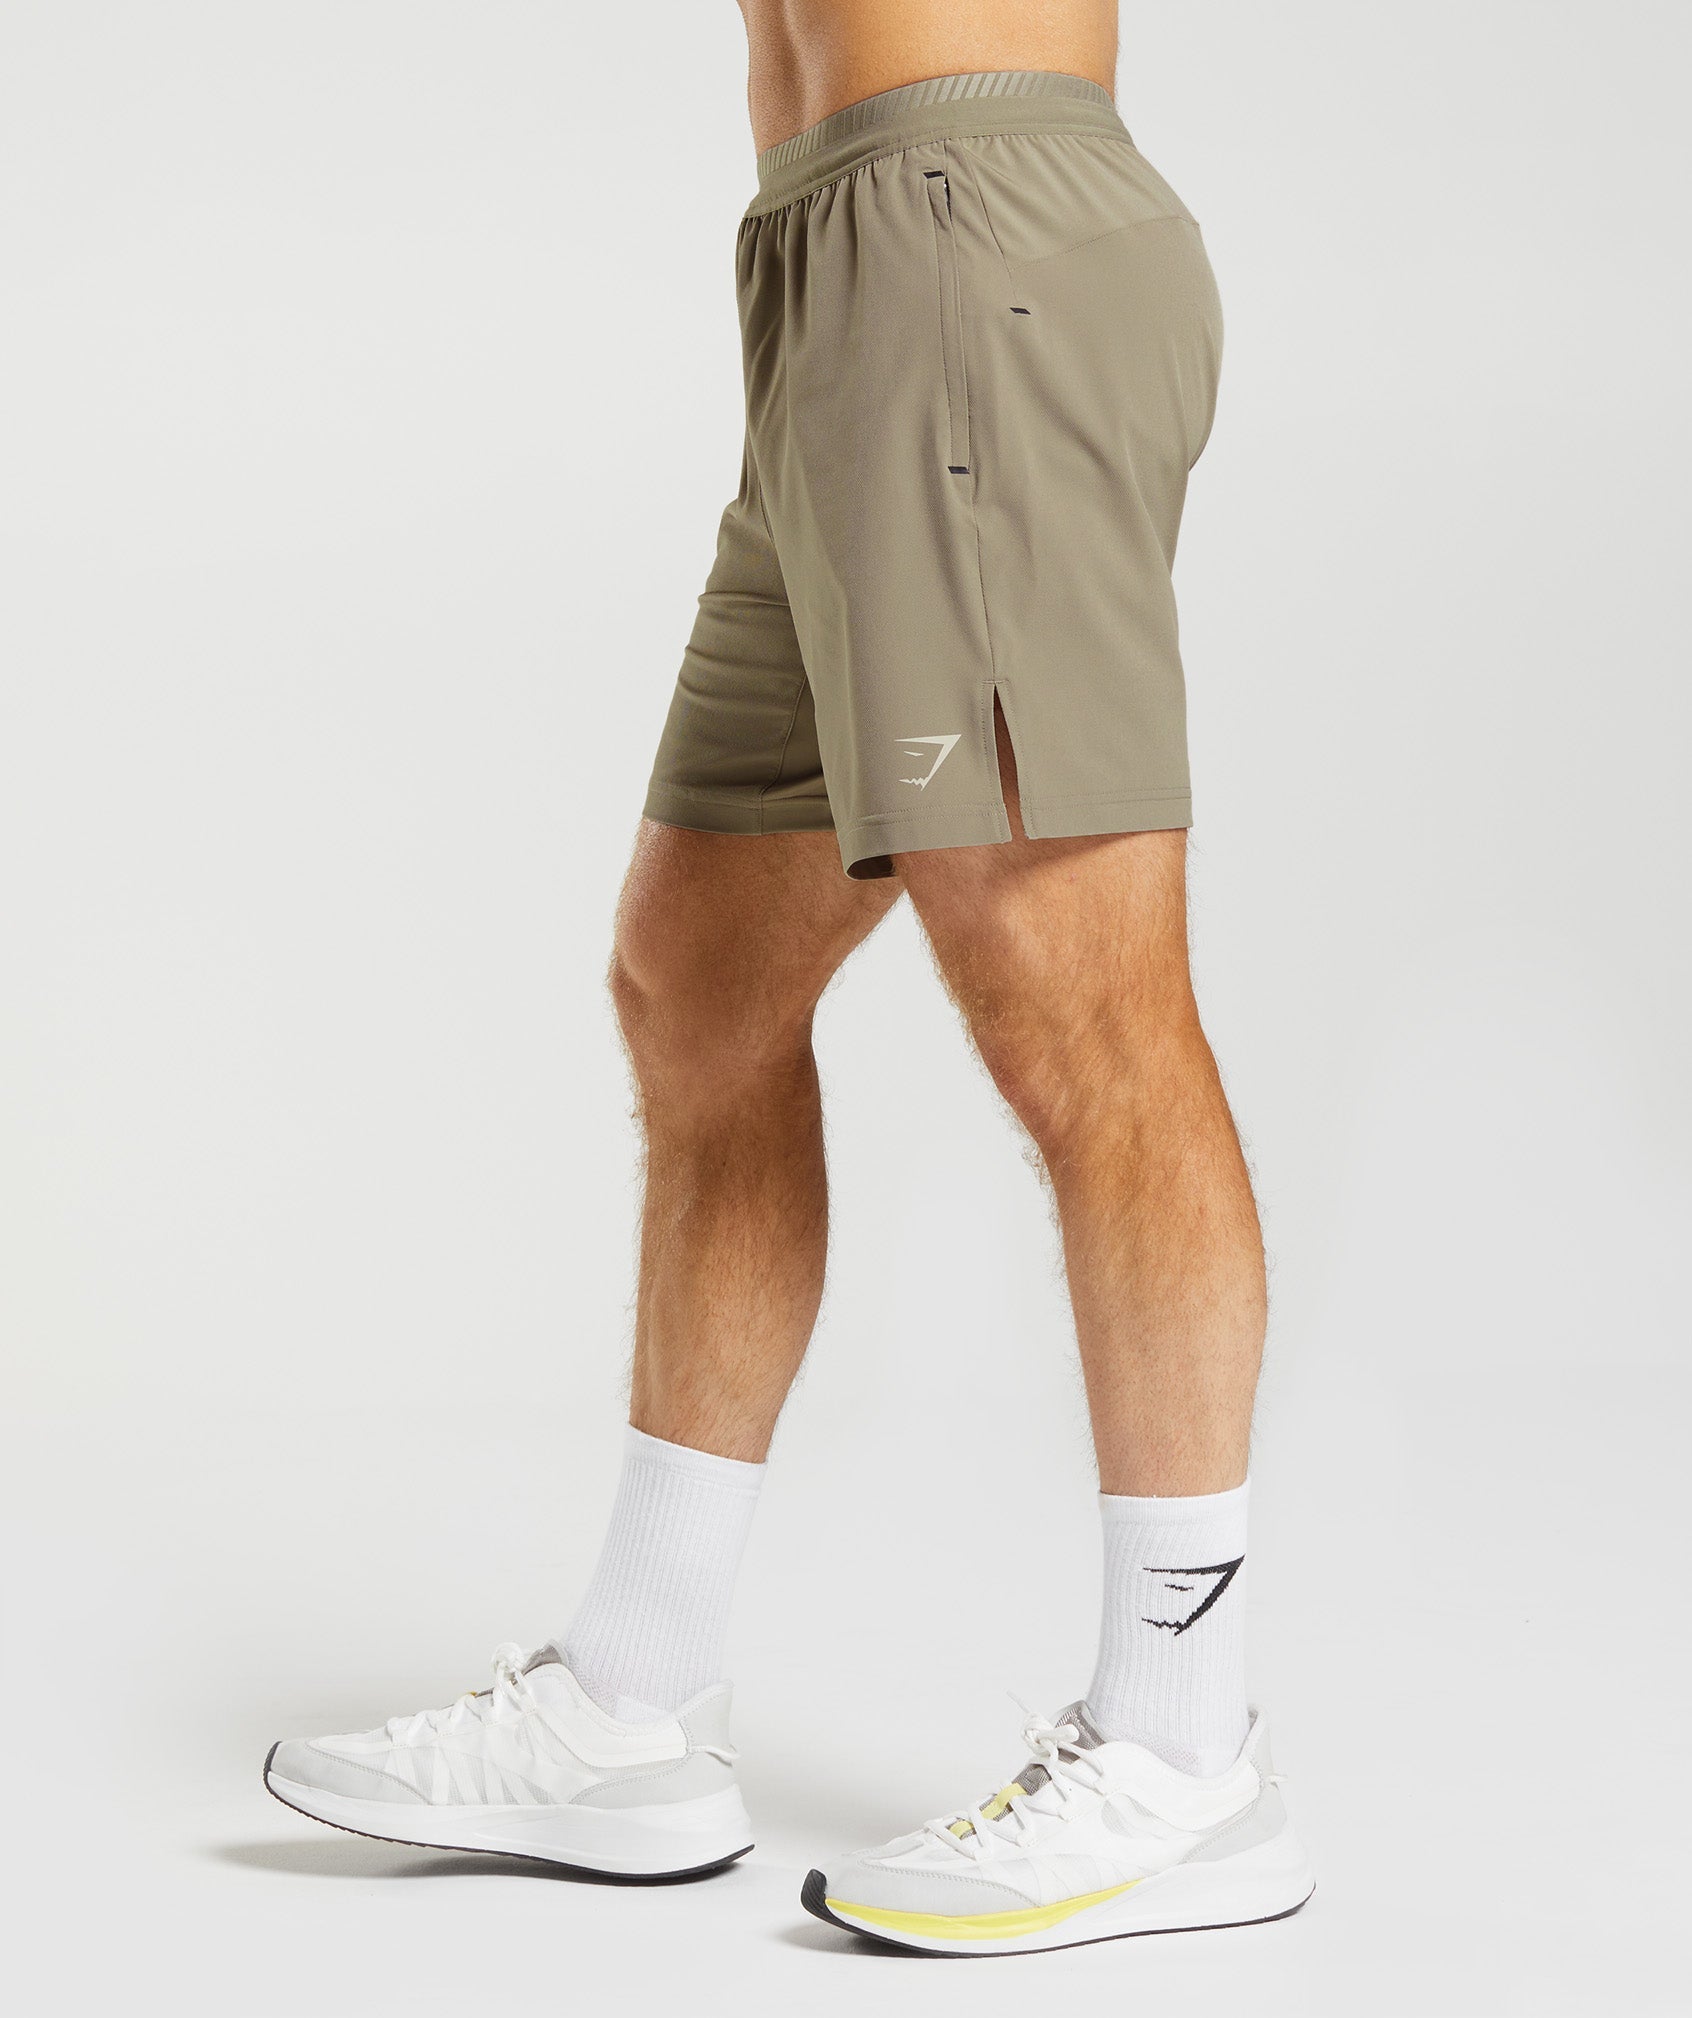 Apex 7" Hybrid Shorts in Earthy Brown - view 3